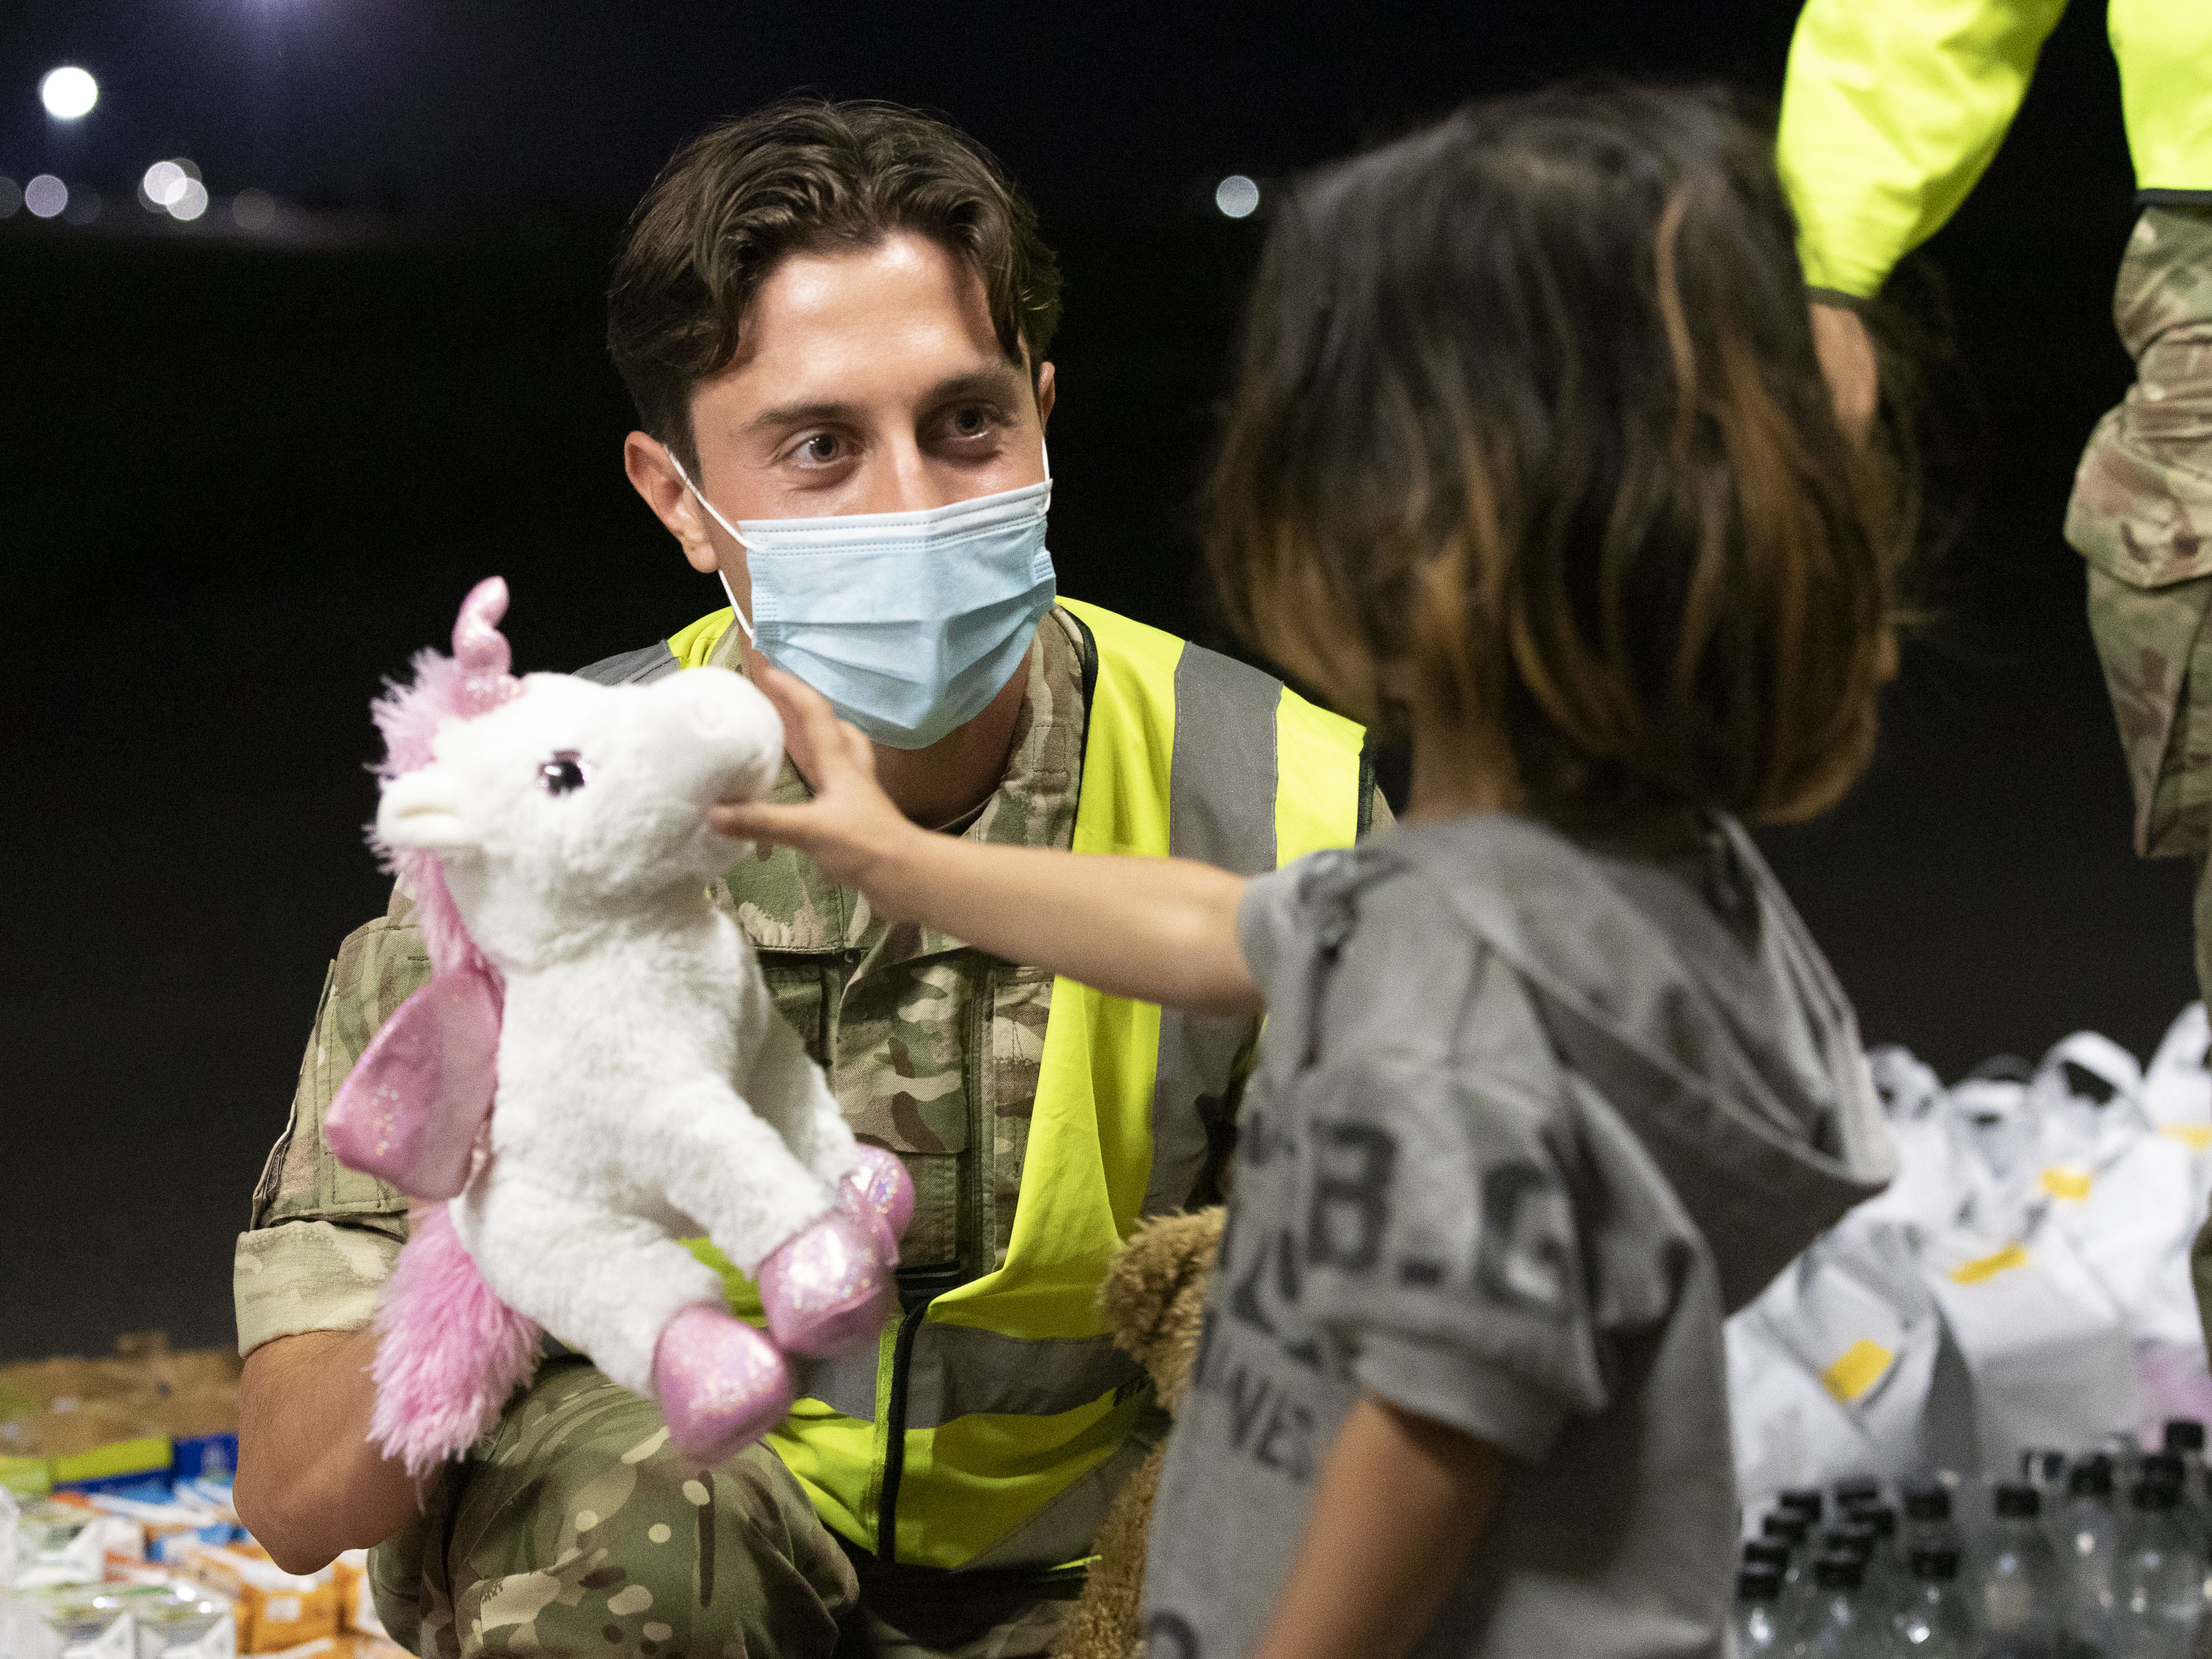 Personnel hand young child a toy unicorn.